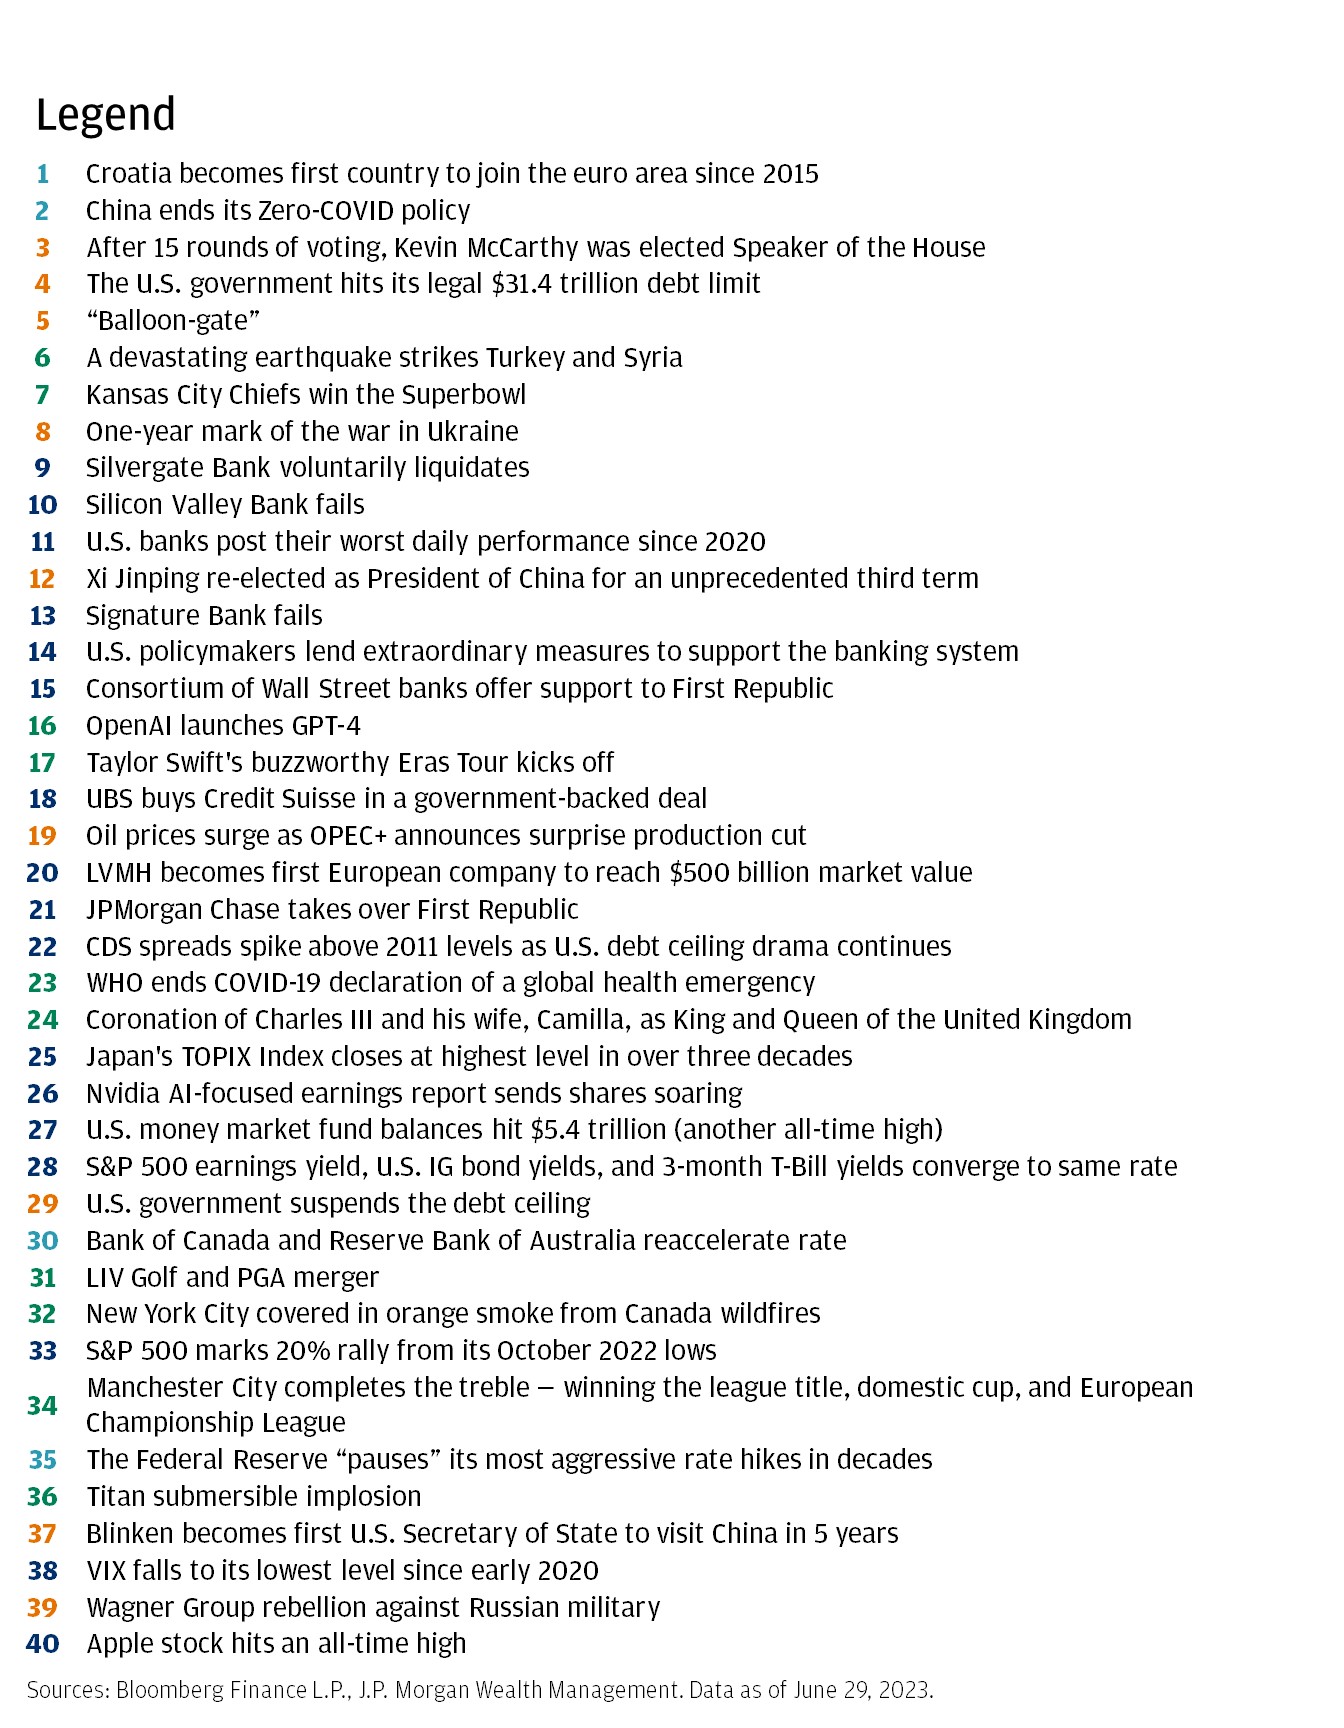 This table shows the 40 events that occurred between January 2023 and June 2023.